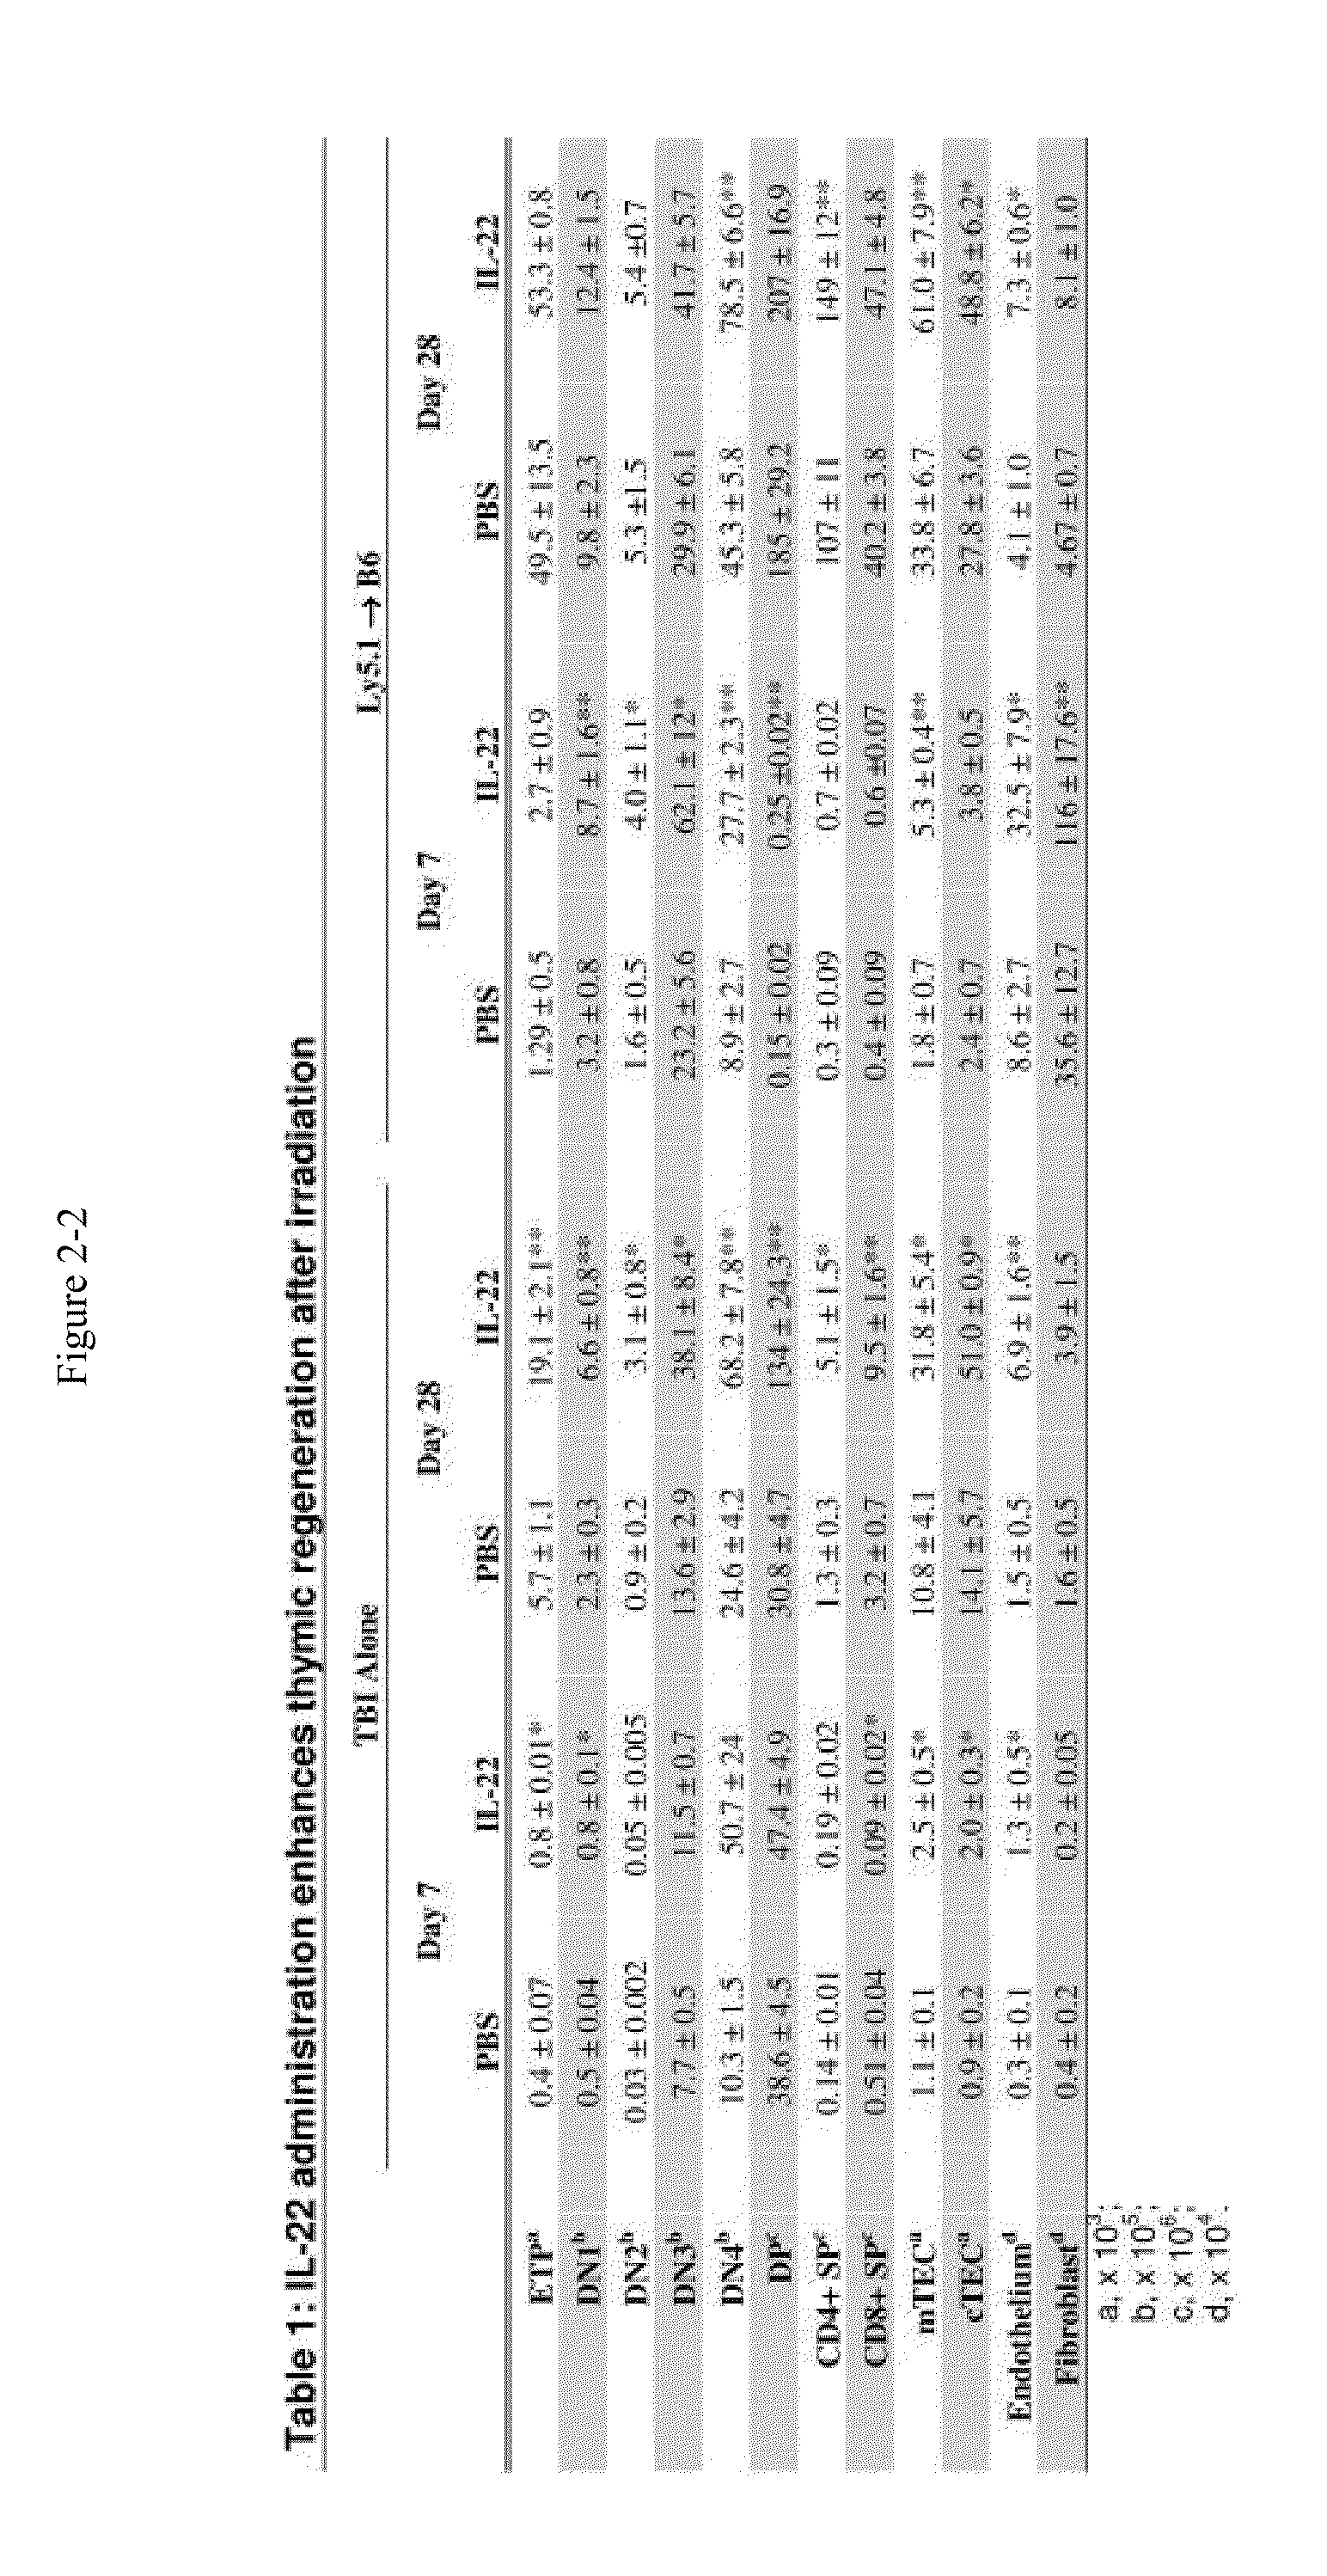 Methods of Use for IL-22 Promoting Rejuvenation Of Thymic And Bone Marrow Function